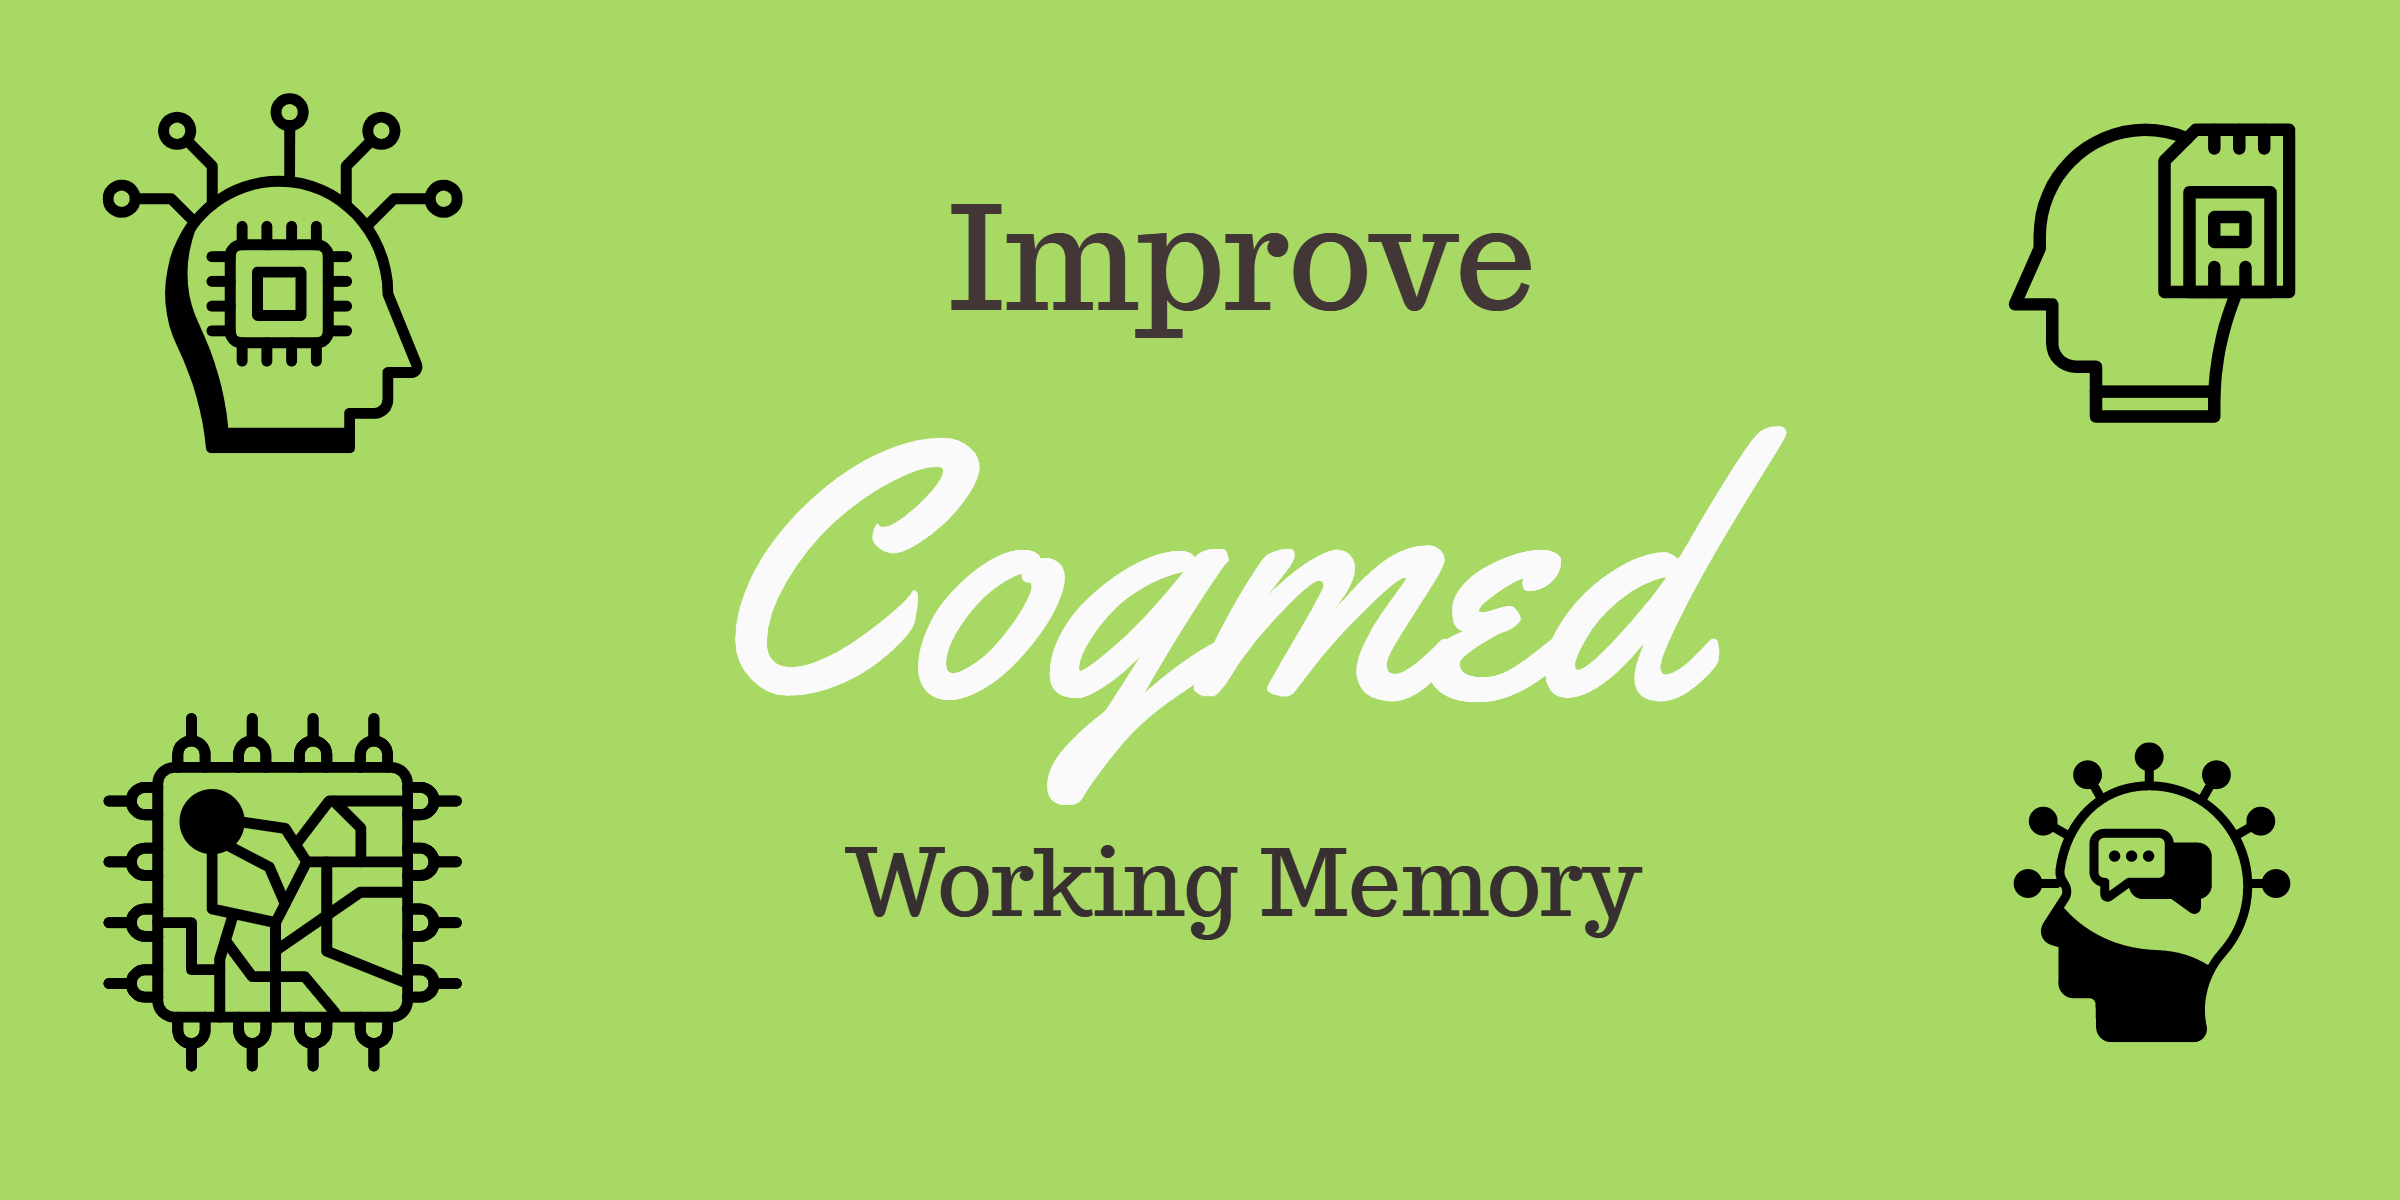 Improve Working Memory with Cogmed